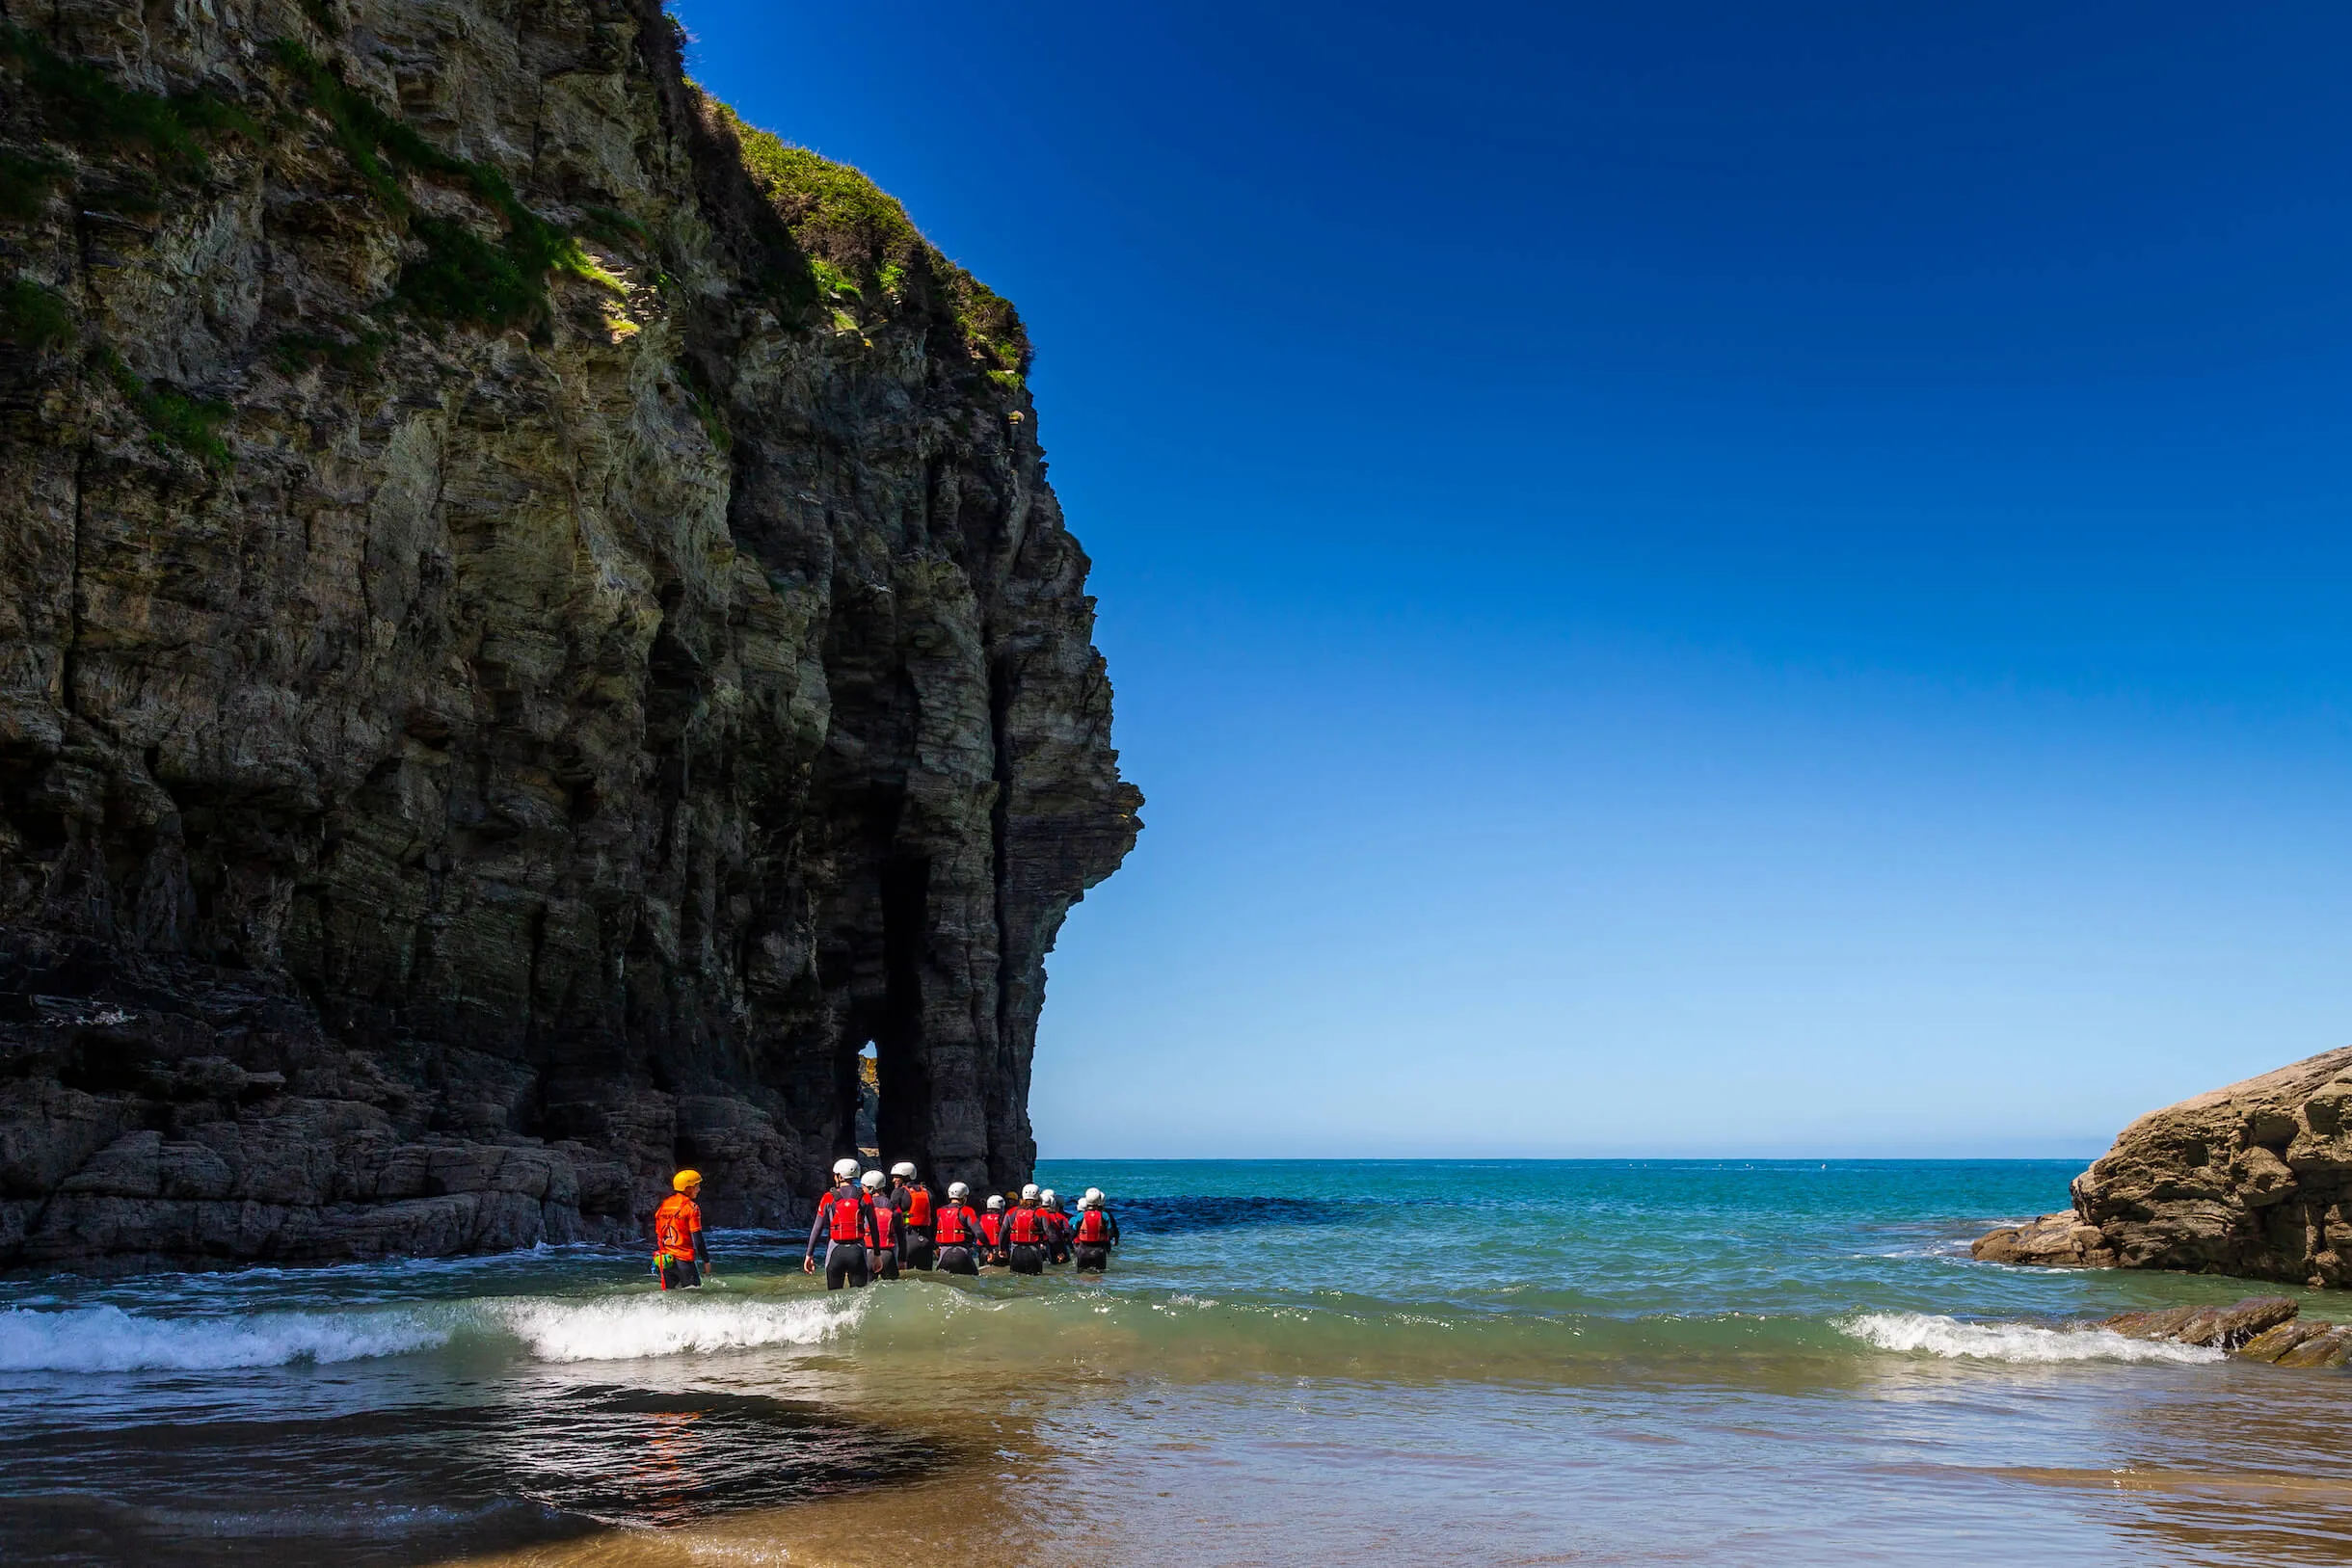 group of people entering the sea in wetsuits, buoyancy aids and helmets at Bossiney Cove